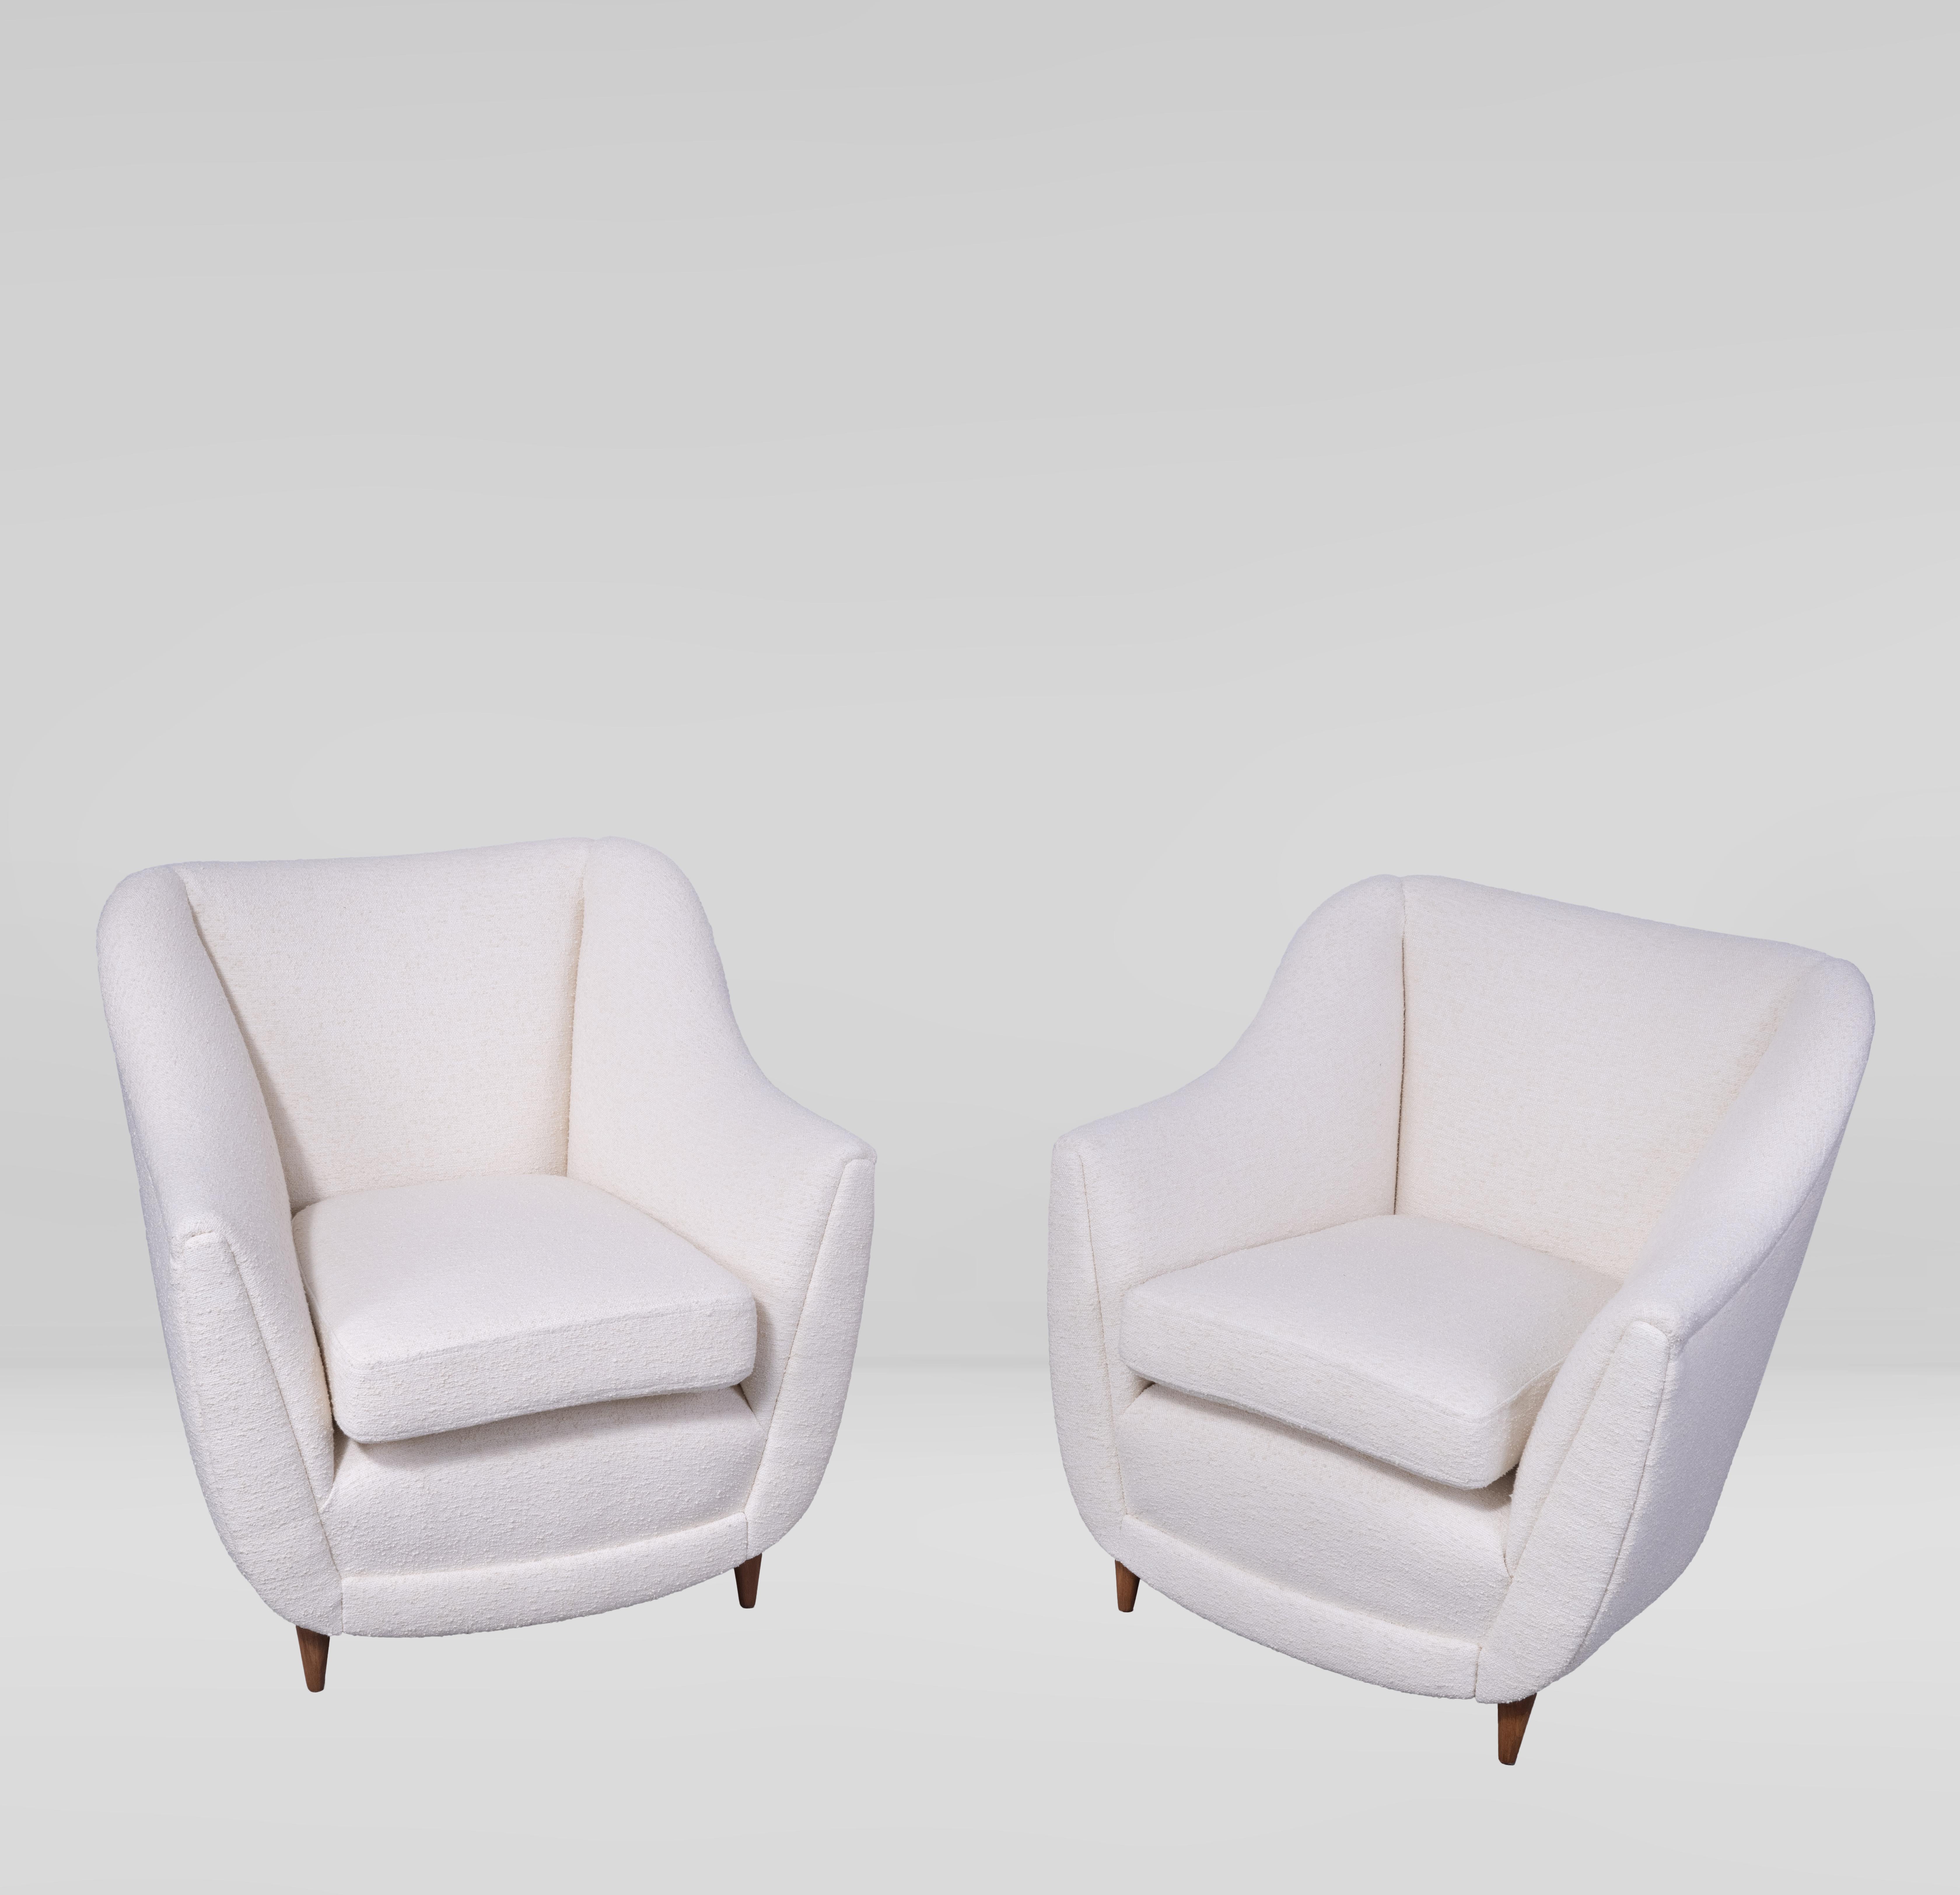 Pair of armchairs in the manner of Gio Ponti, Italy 1950s, legs in walnut wood, reupholstered in ivory Nobilis bouclette (Stella).